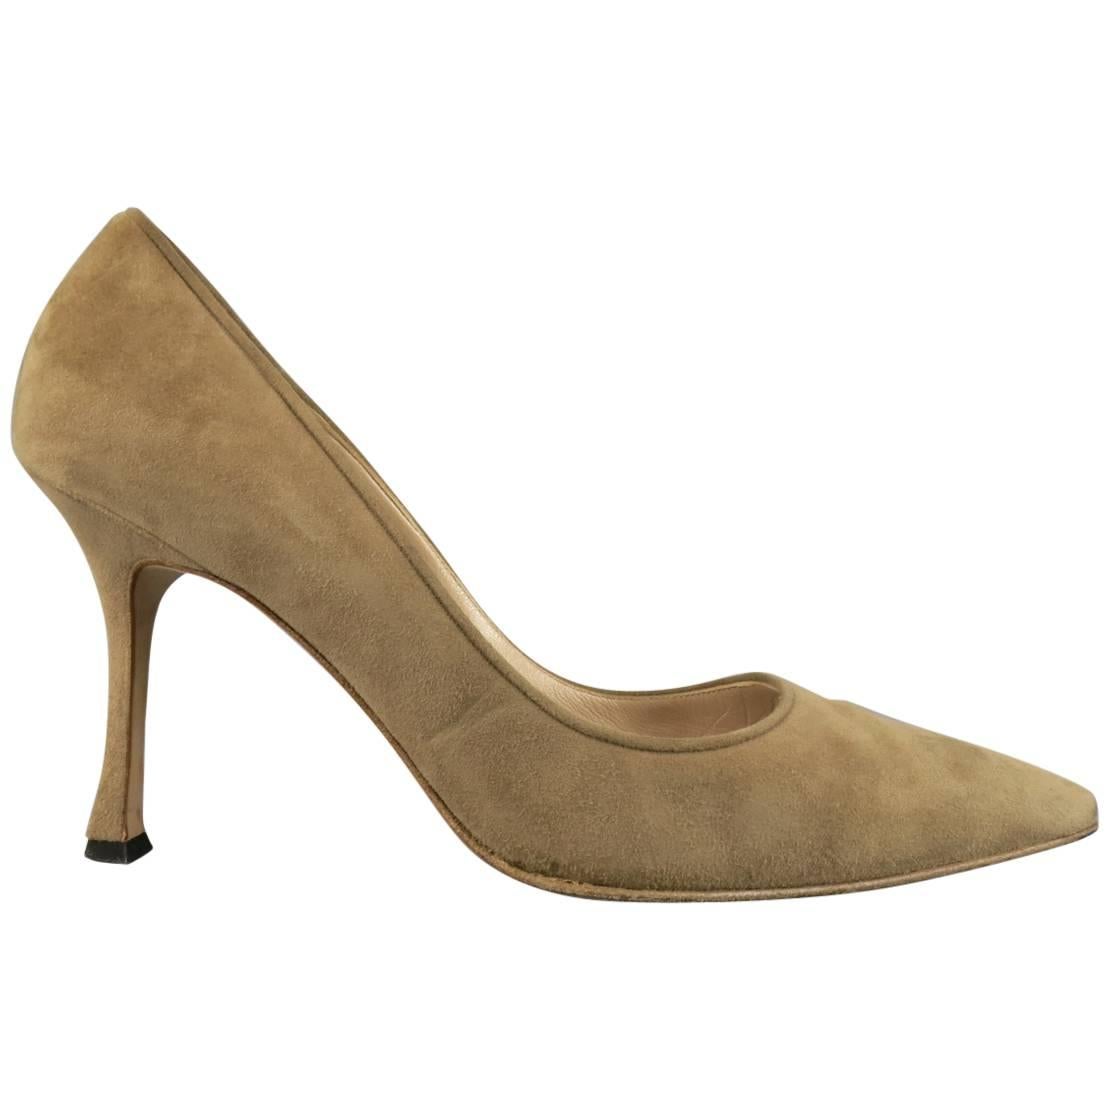 MANOLO BLAHNIK Size 8 Taupe Suede Pointed Toe Pumps